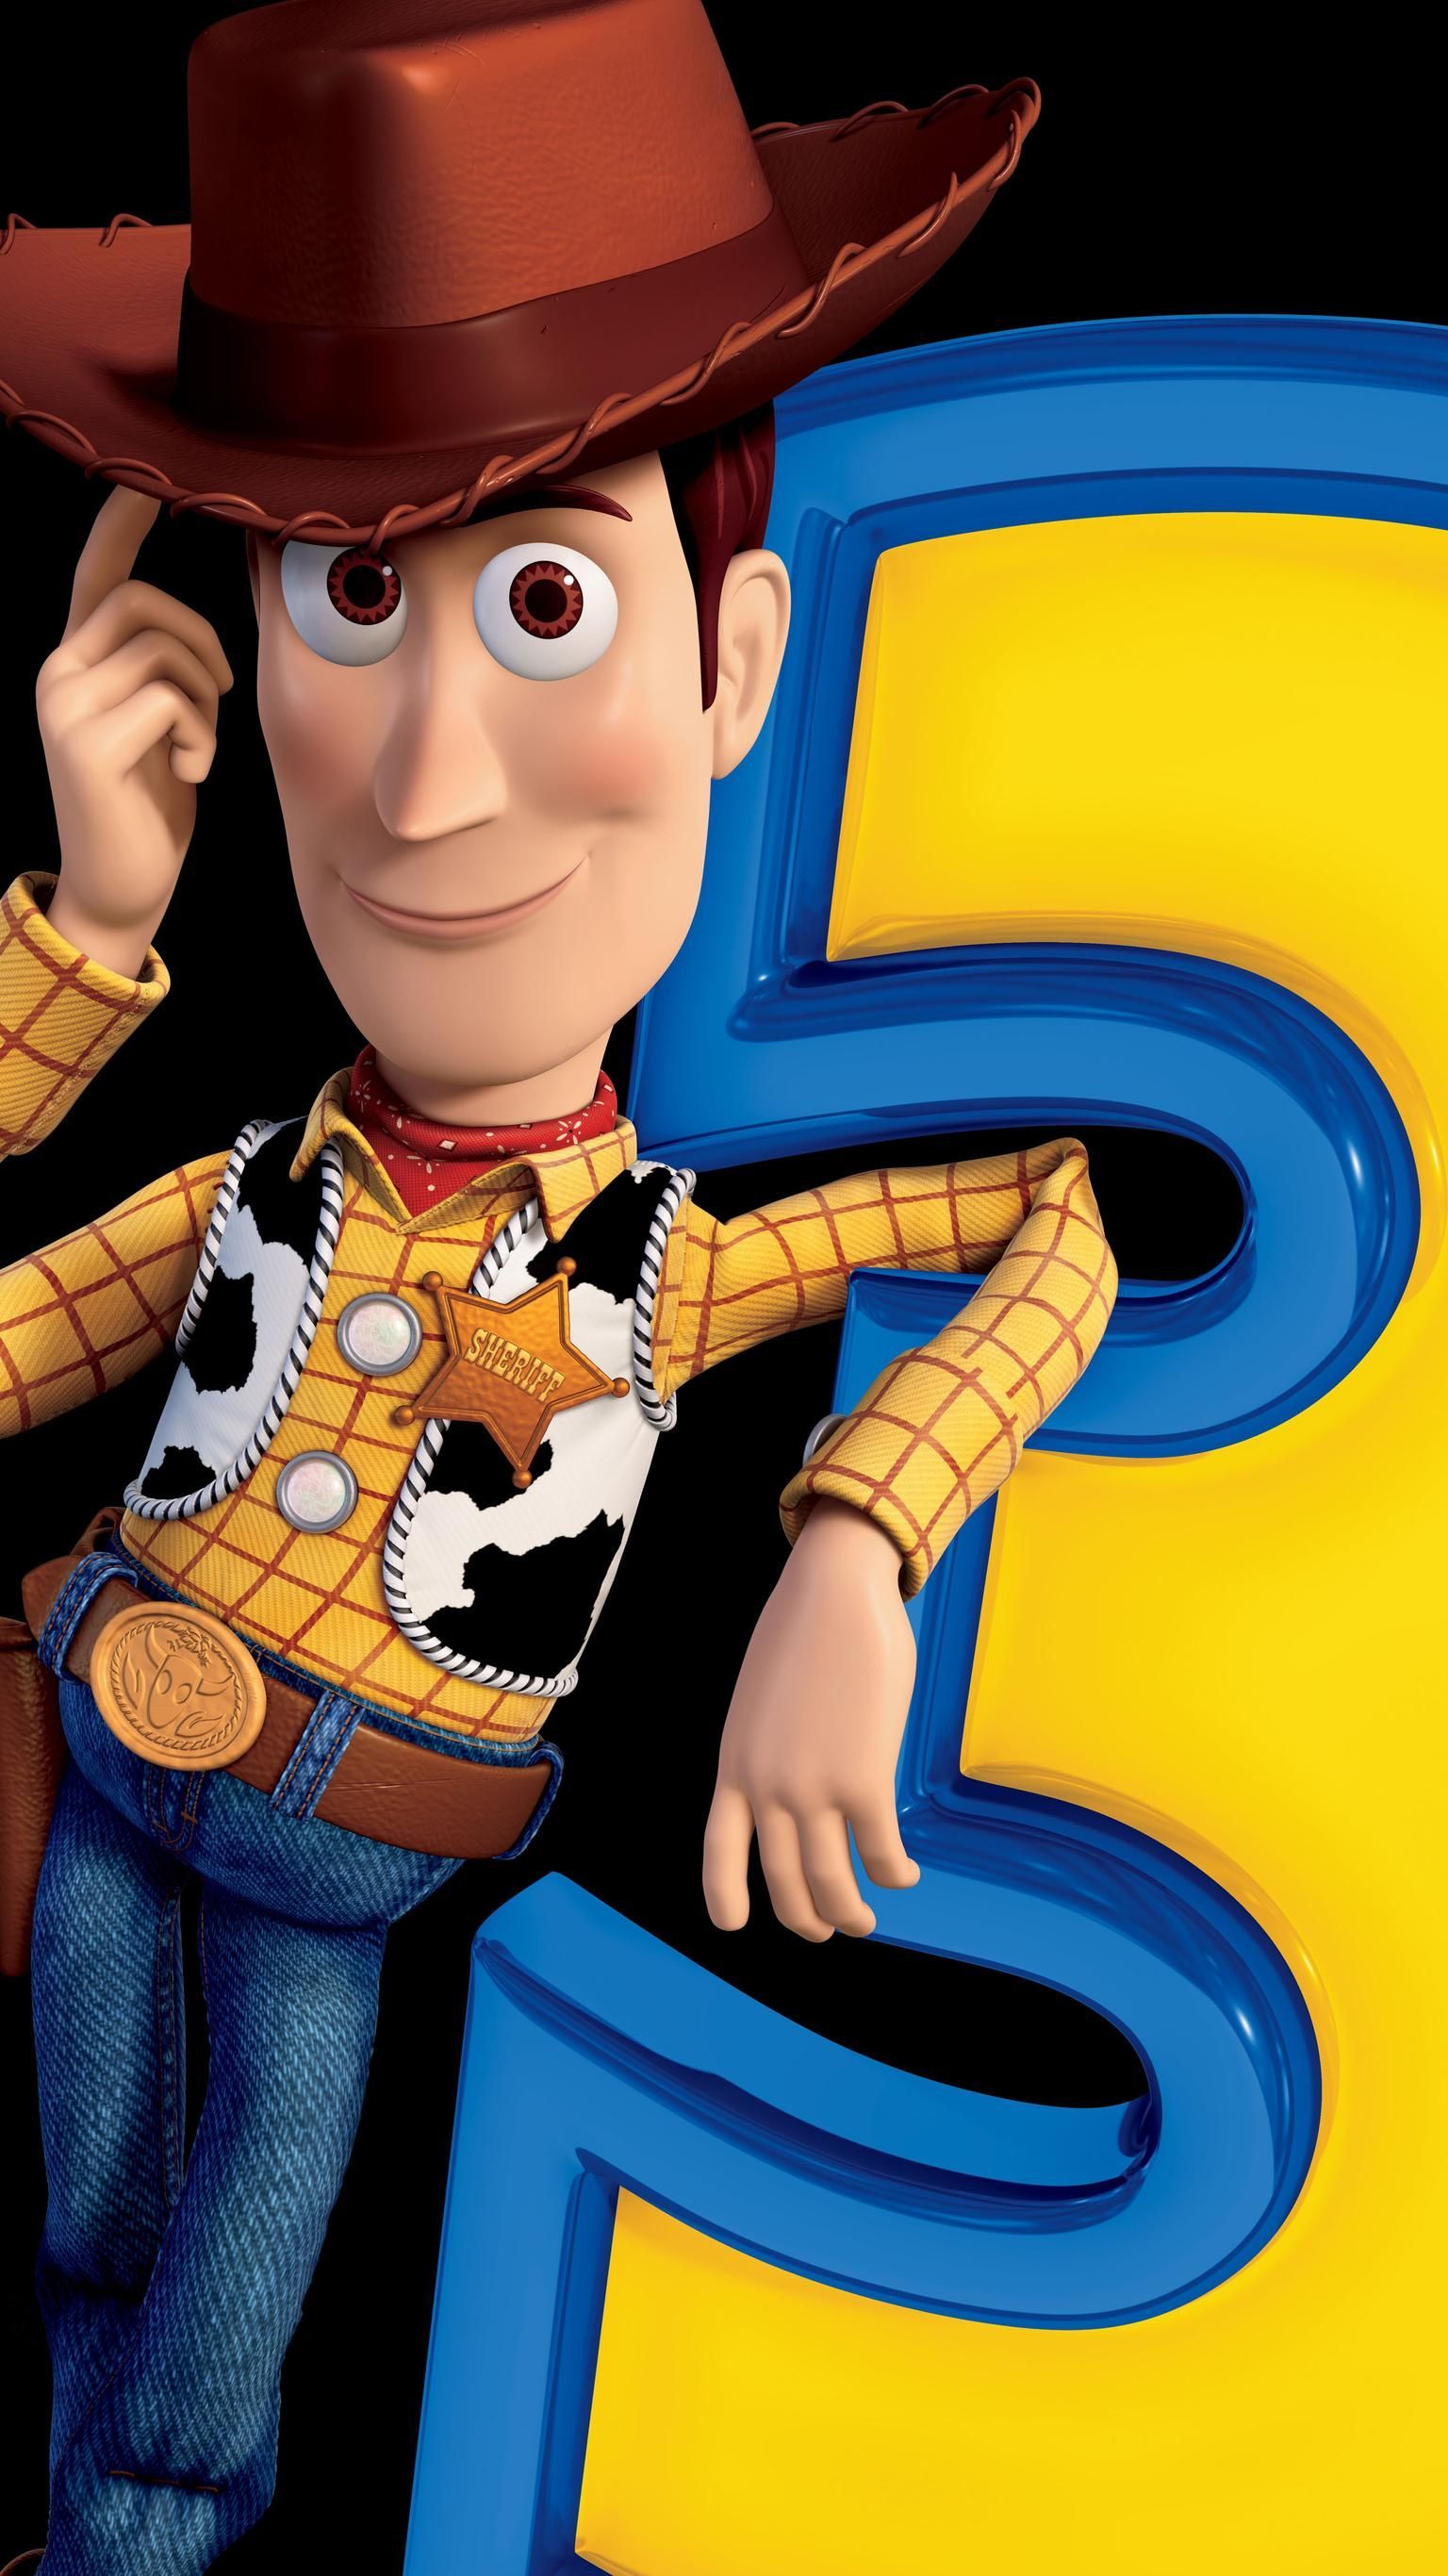 Toy Story 3 (2010) Phone Wallpaper. Woody toy story, Toy story 3